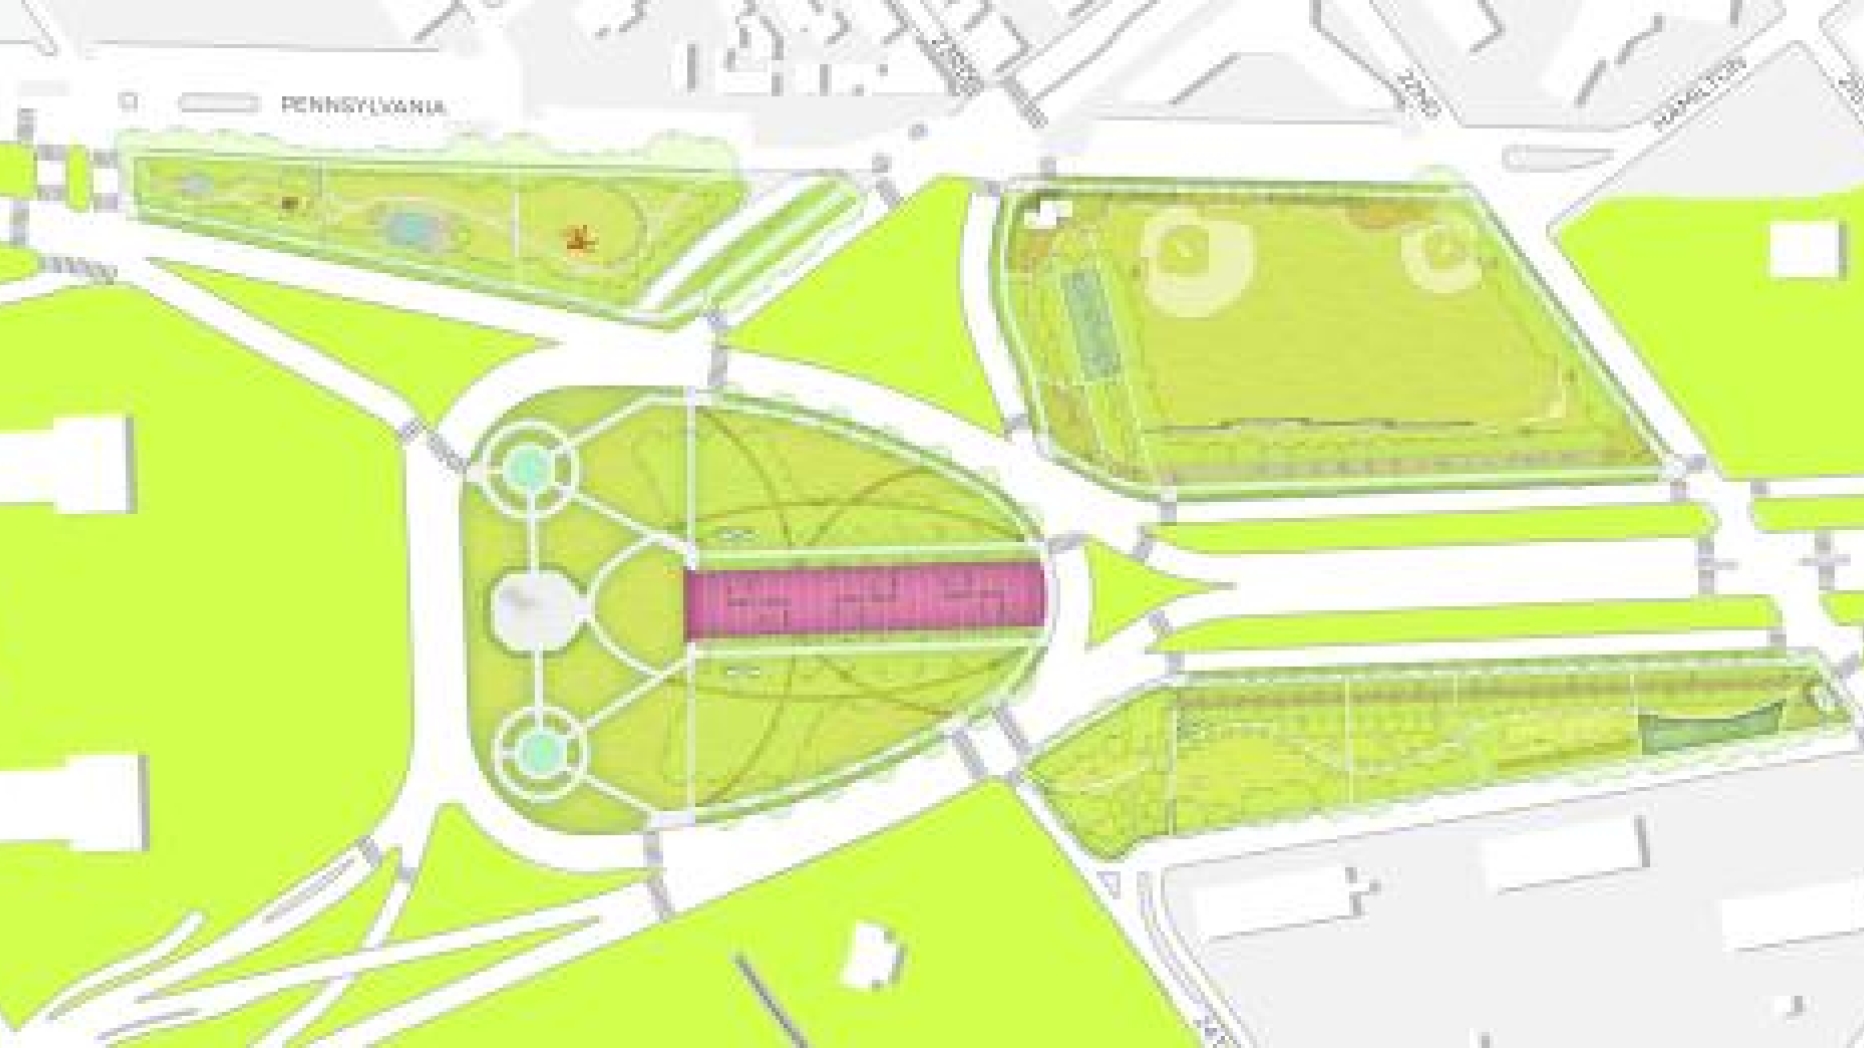 Map of section of the Benjamin Franklin Parkway with proposed changes and developments added.